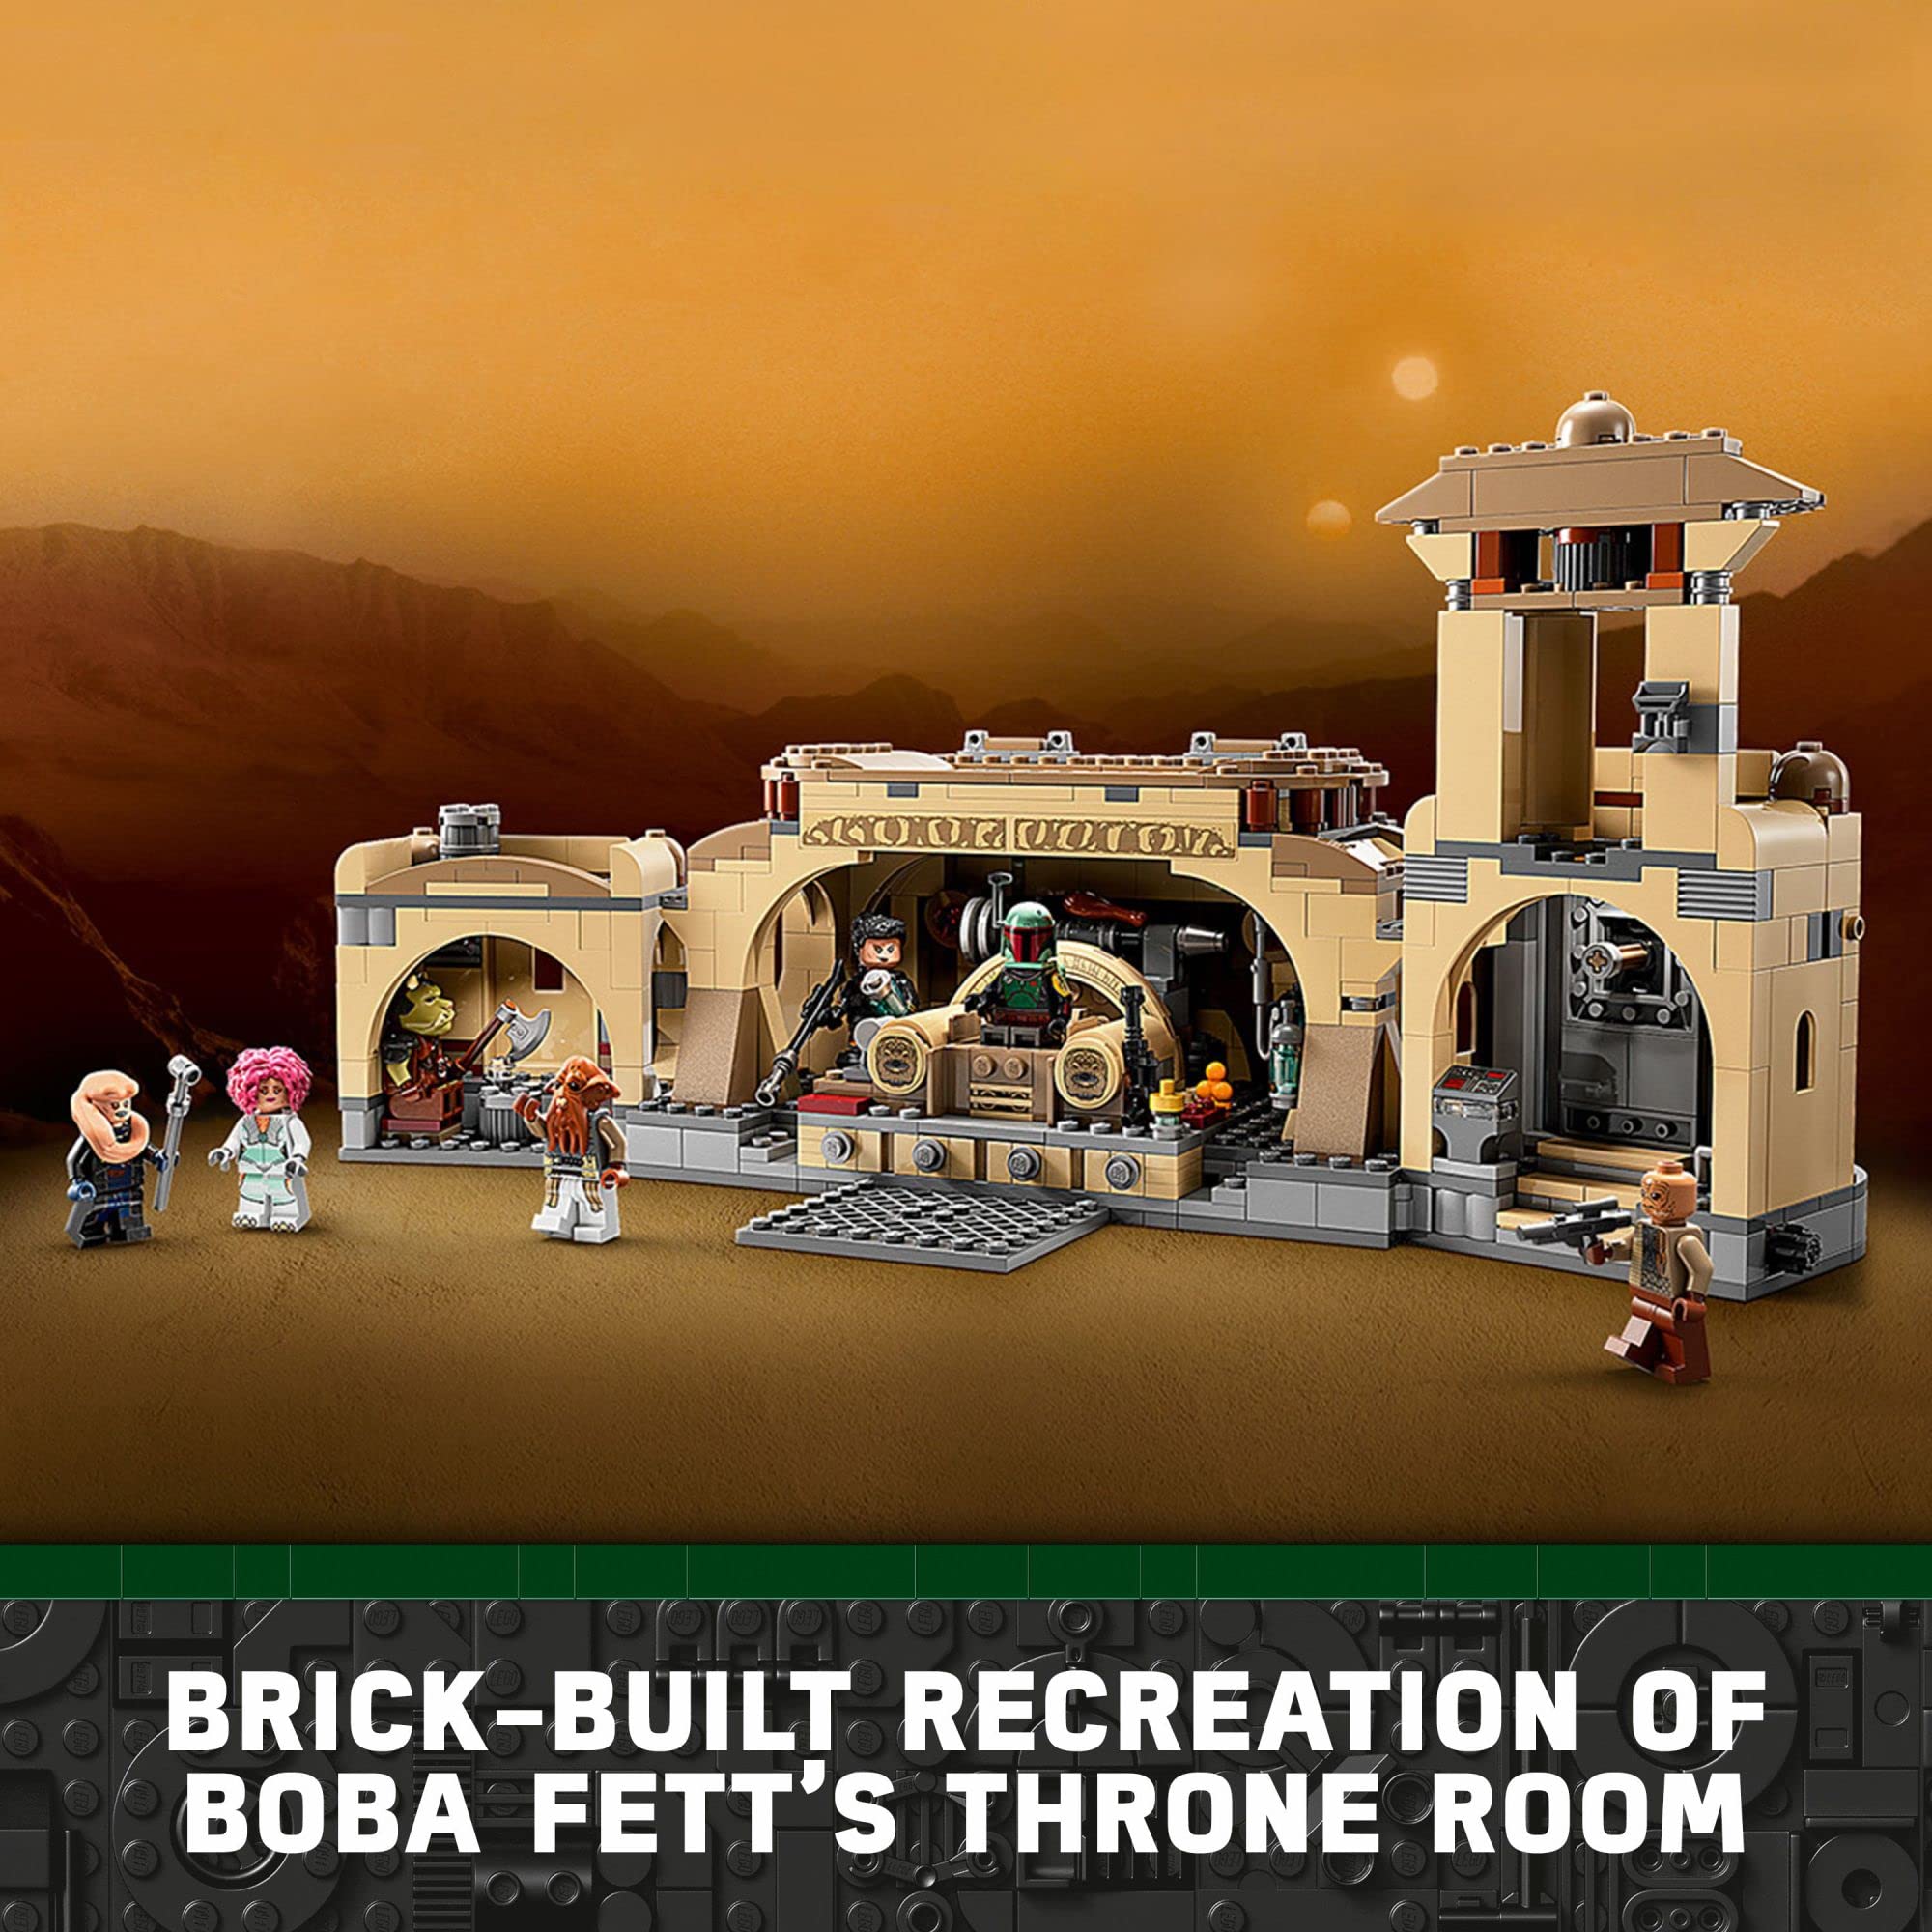 LEGO Star Wars Boba Fett’s Throne Room Building Kit 75326, with Jabba The Hutt Palace and 7 Minifigures, Star Wars Building Set, Great Gift for Star Wars Fans, Boys, Girls, Kids Age 7+ Years Old